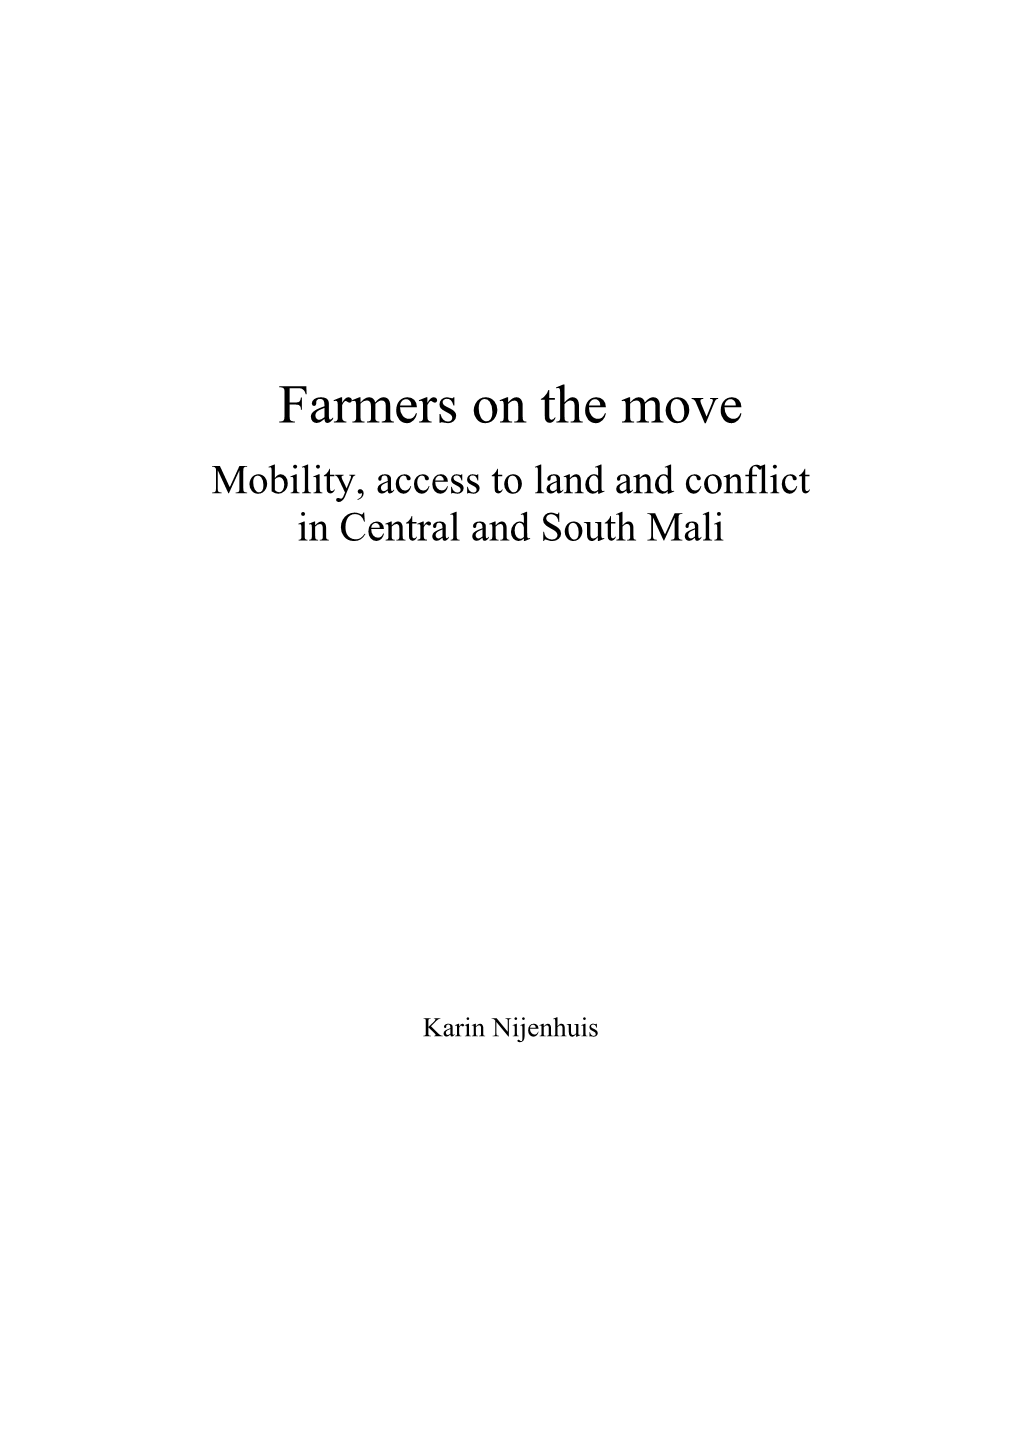 Farmers on the Move Mobility, Access to Land and Conflict in Central and South Mali